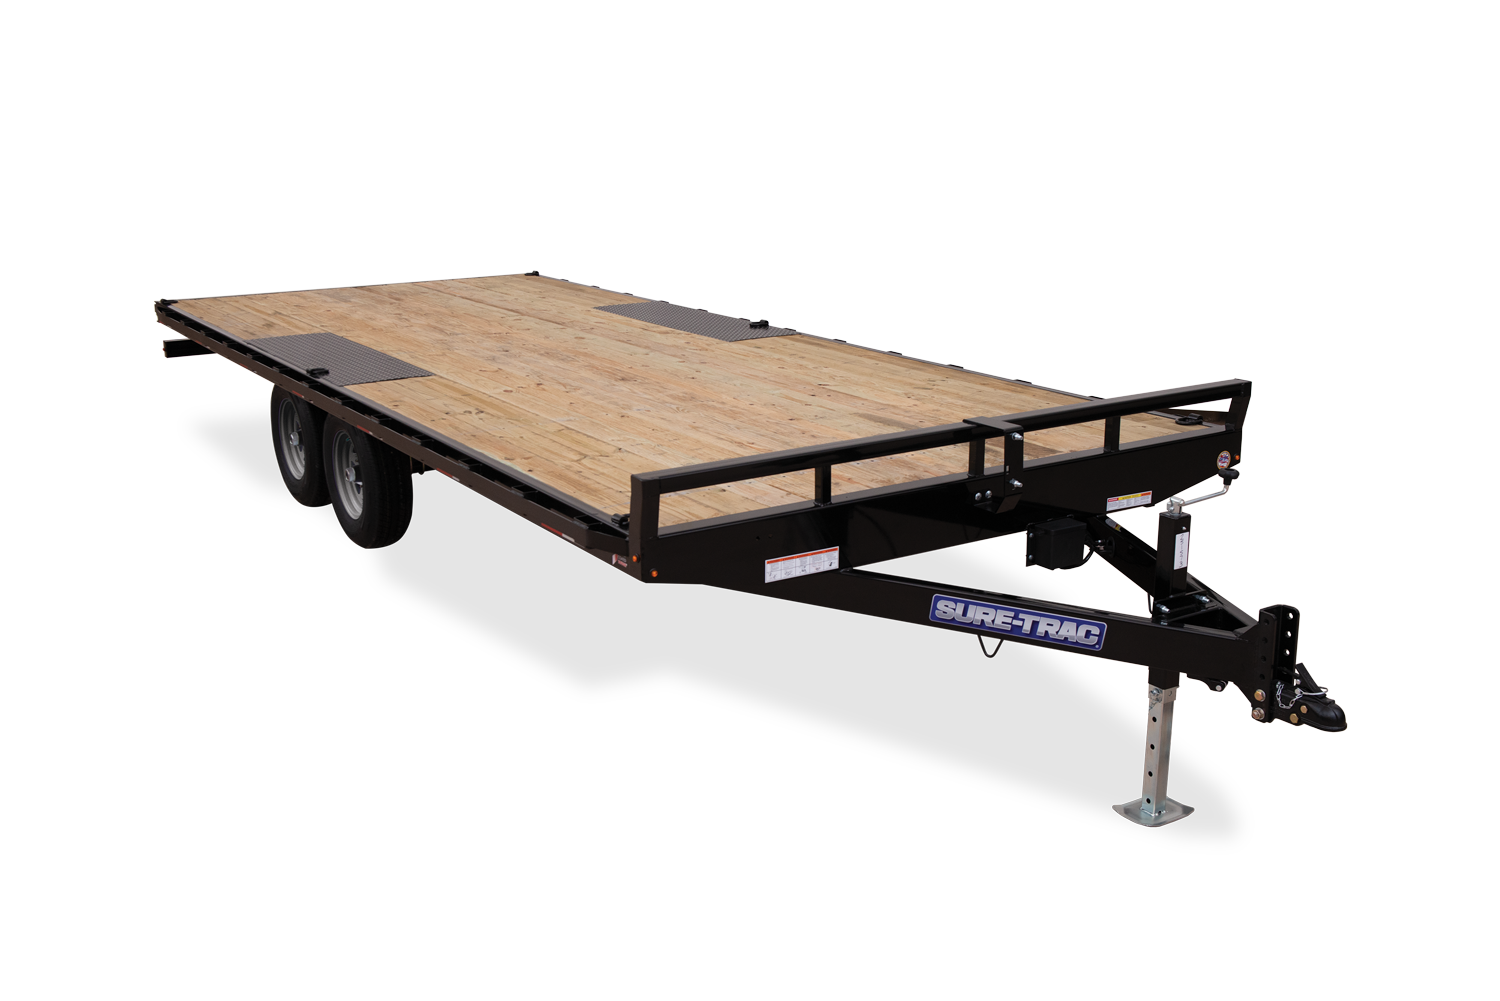 Front View of the Low Profile Flatbed Deckover